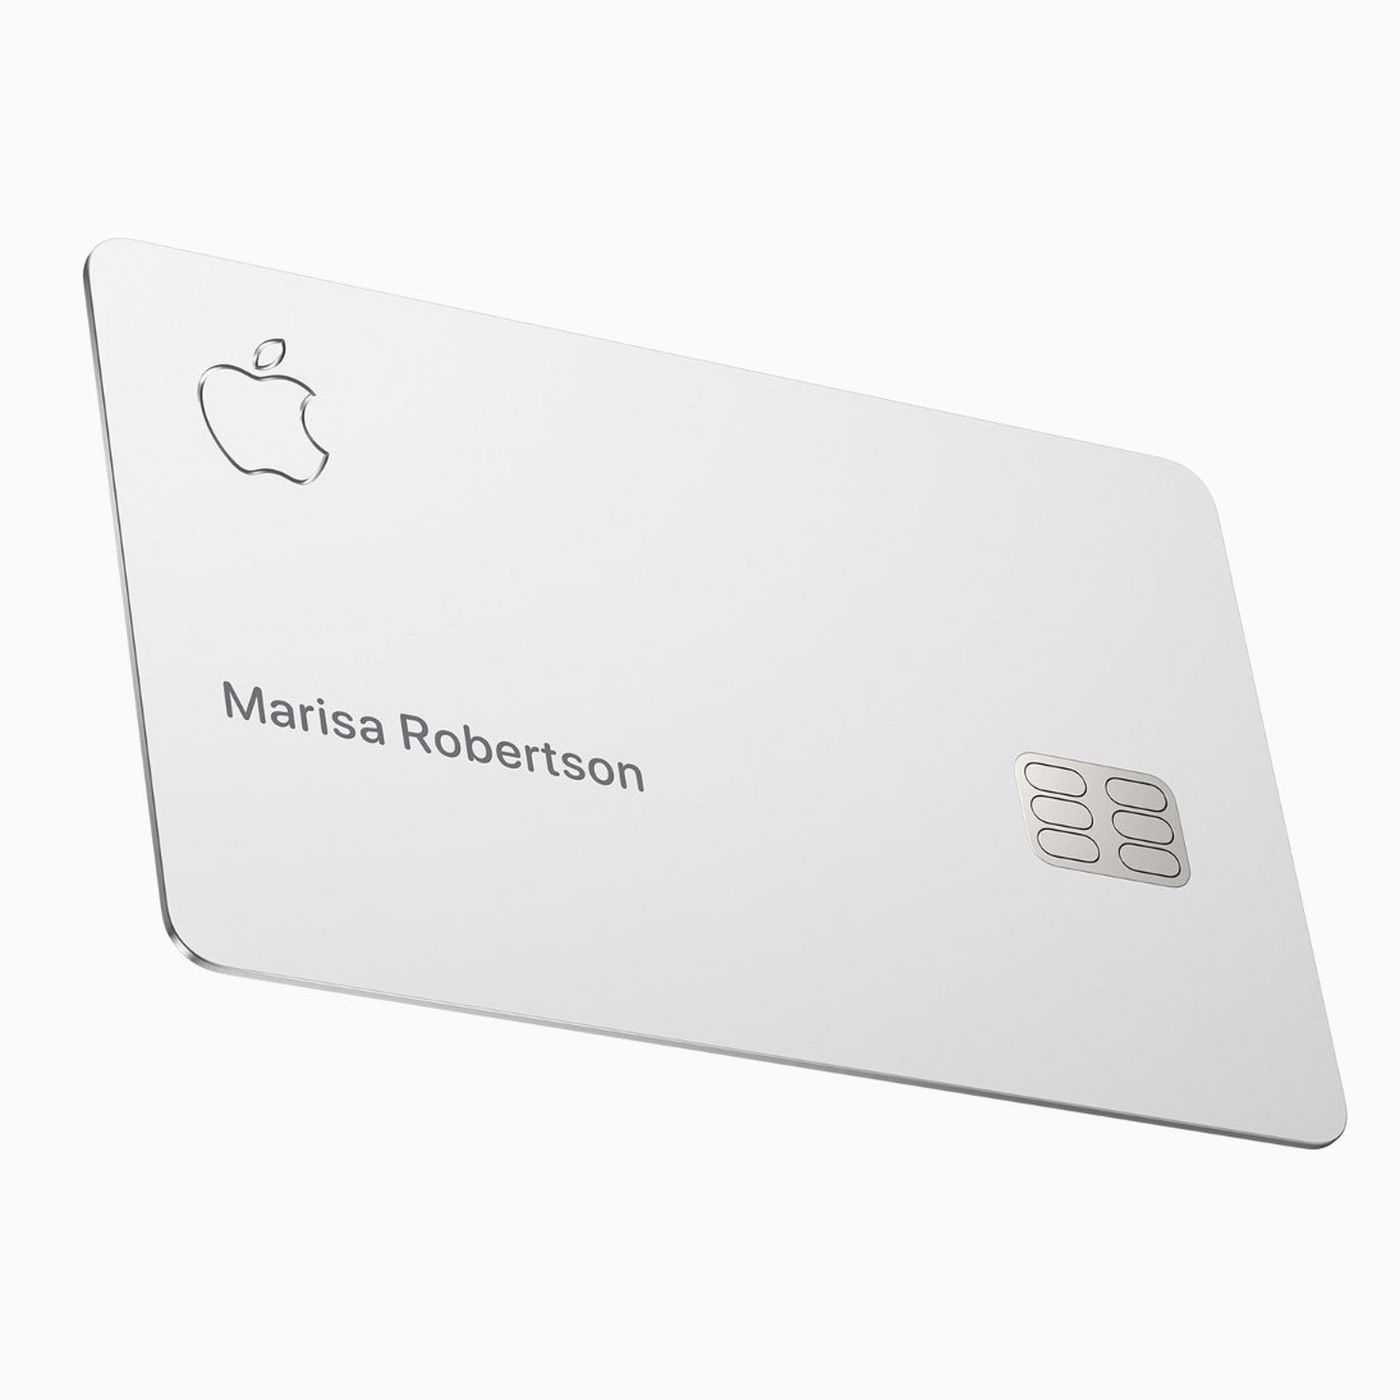 Apple Card: Apple's Thinnest And Lightest Status Symbol Ever For Paul Allen Business Card Template